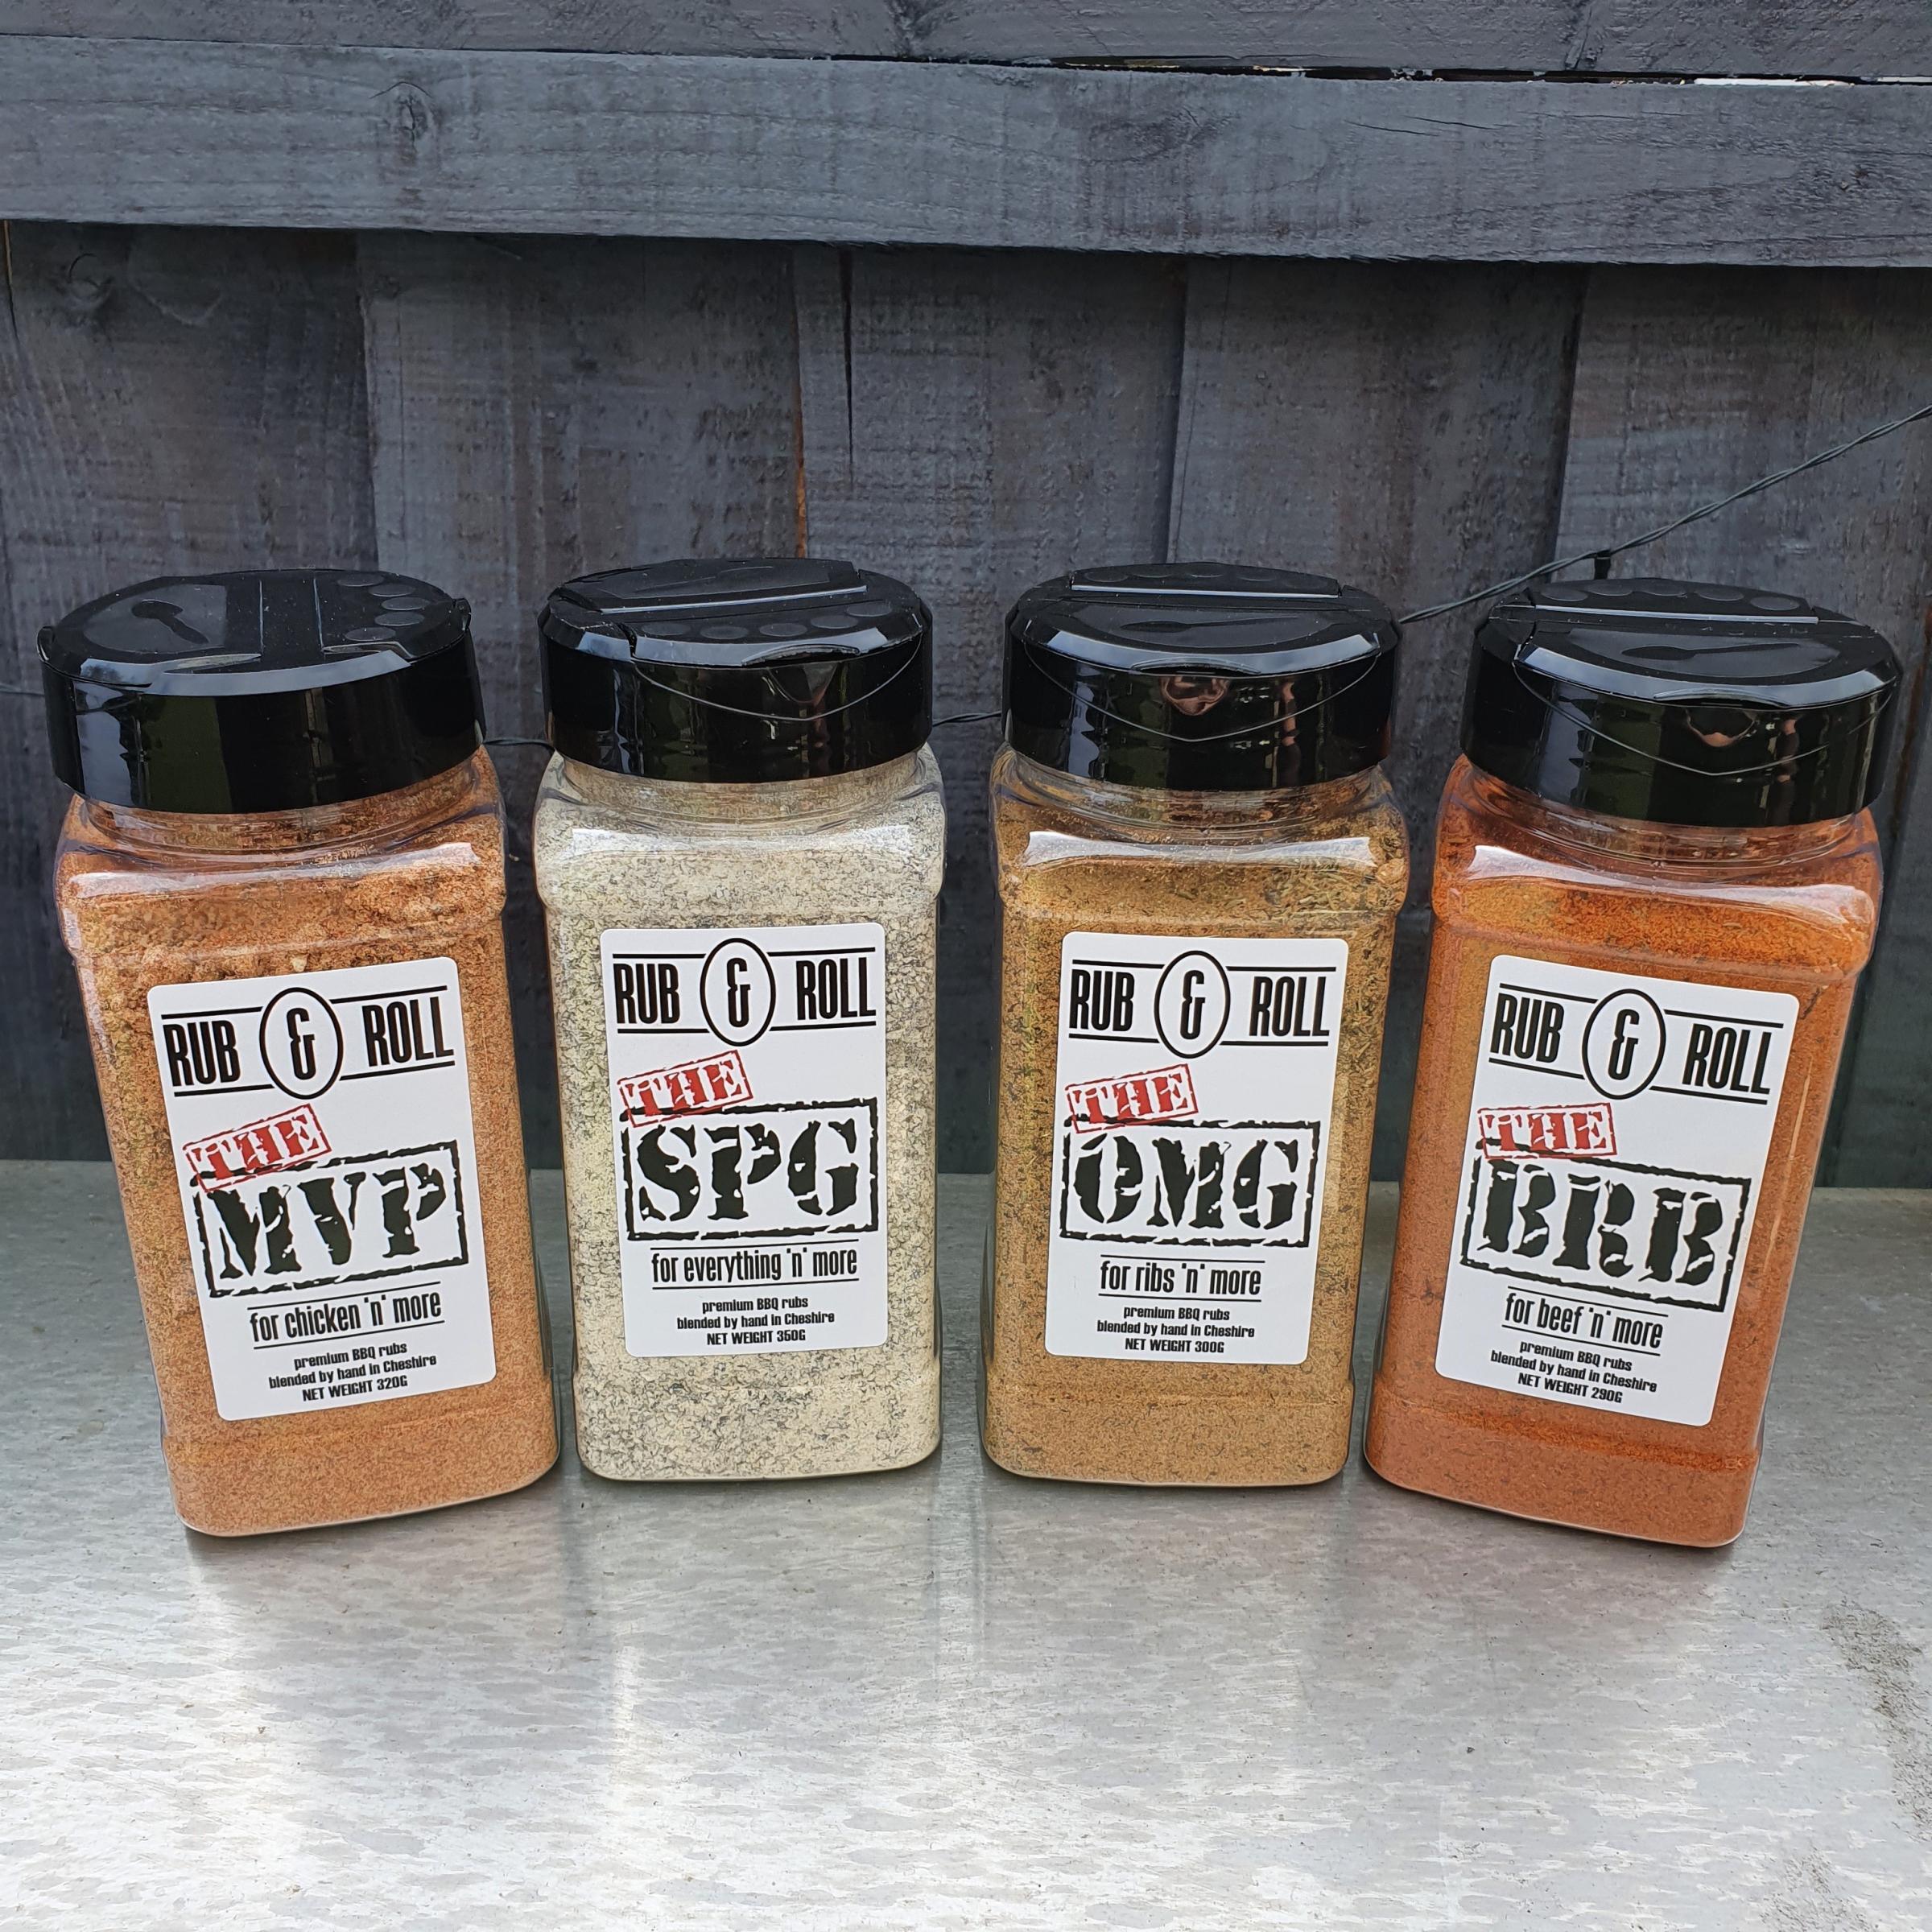 Some of the Rub and Roll products